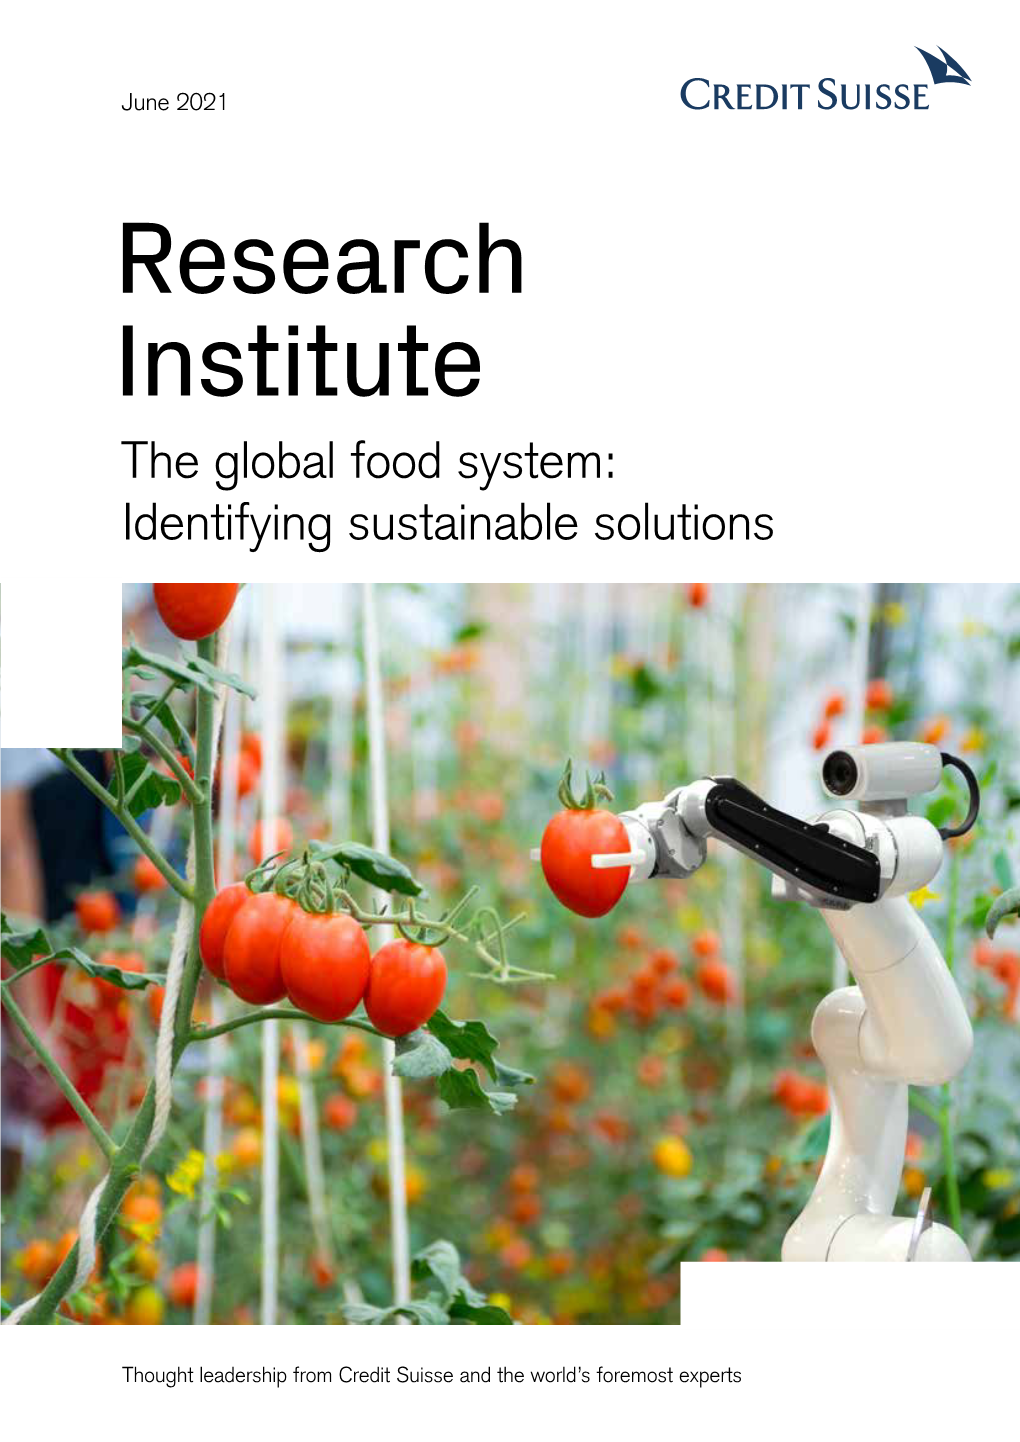 The Global Food System: Identifying Sustainable Solutions